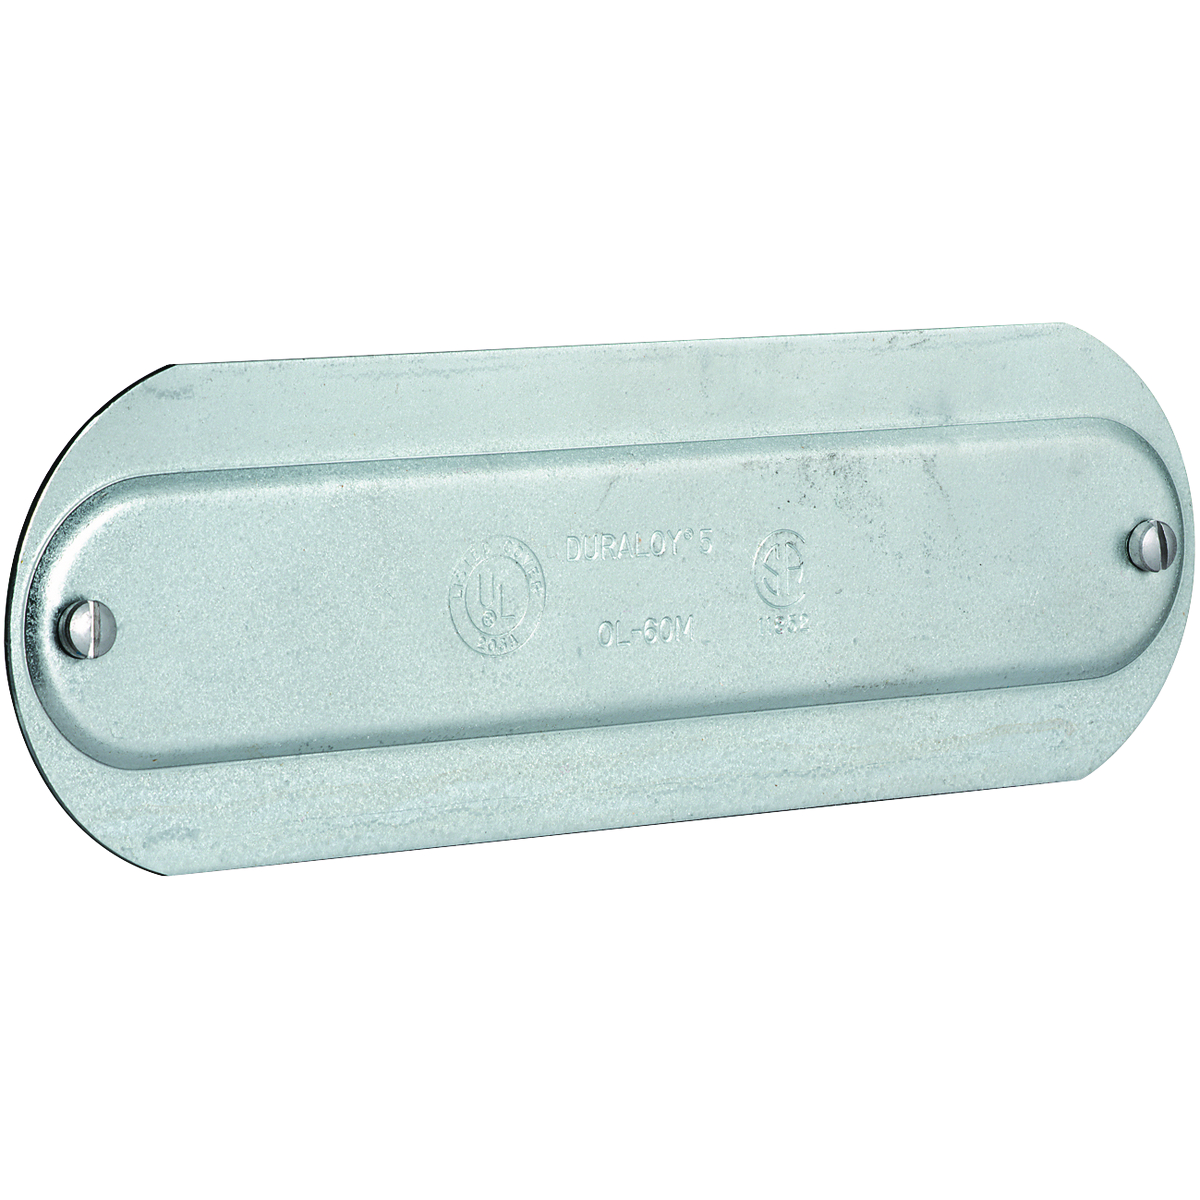 O SERIES/DURALOY 5 SERIES - STEEL STAMPED CONDUIT BODY COVER - HUB SIZE1/2 INCH